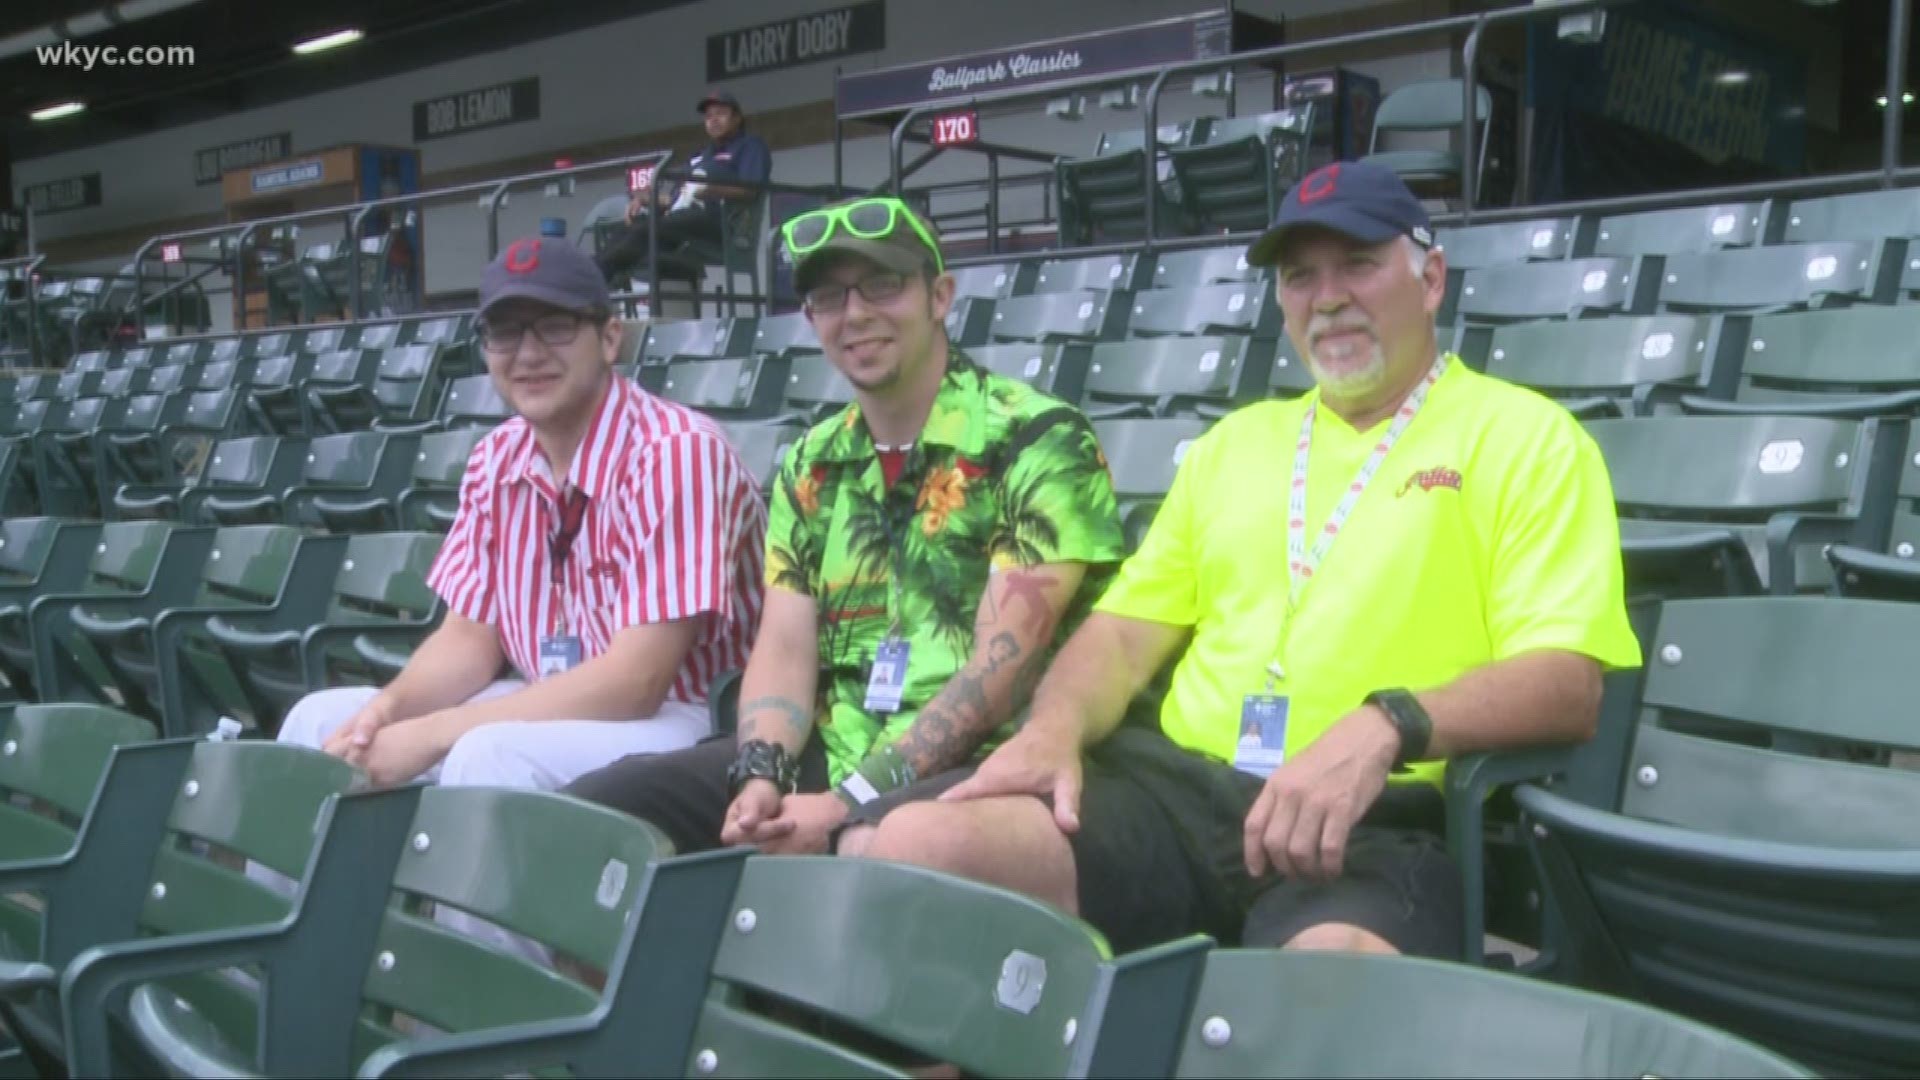 Aug. 14, 2019: Three vendors. Three generations. One family. These three men are becoming icons of Progressive Field as they all work as vendors with the Cleveland Indians.